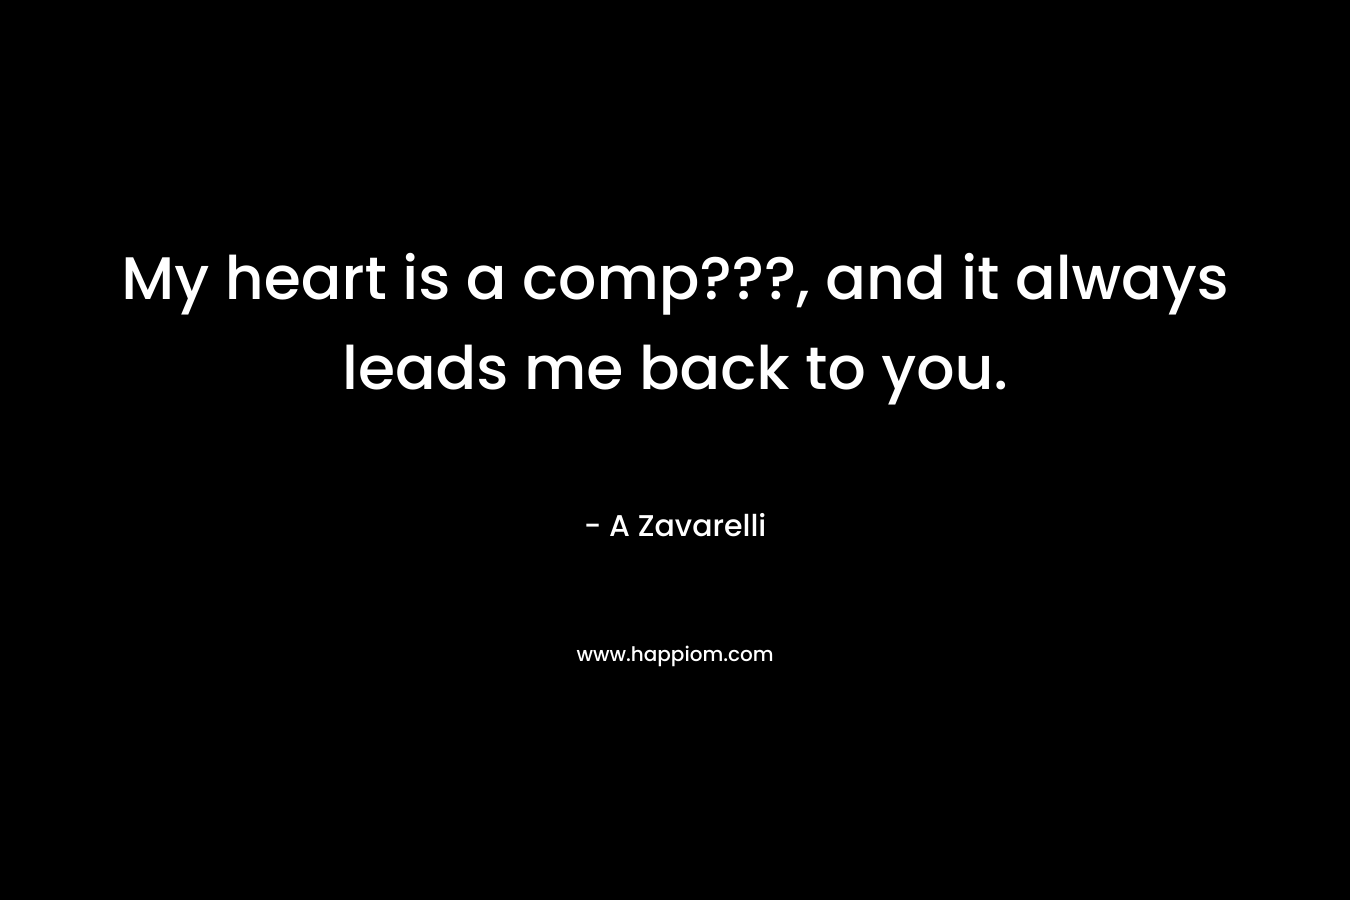 My heart is a comp???, and it always leads me back to you. – A Zavarelli